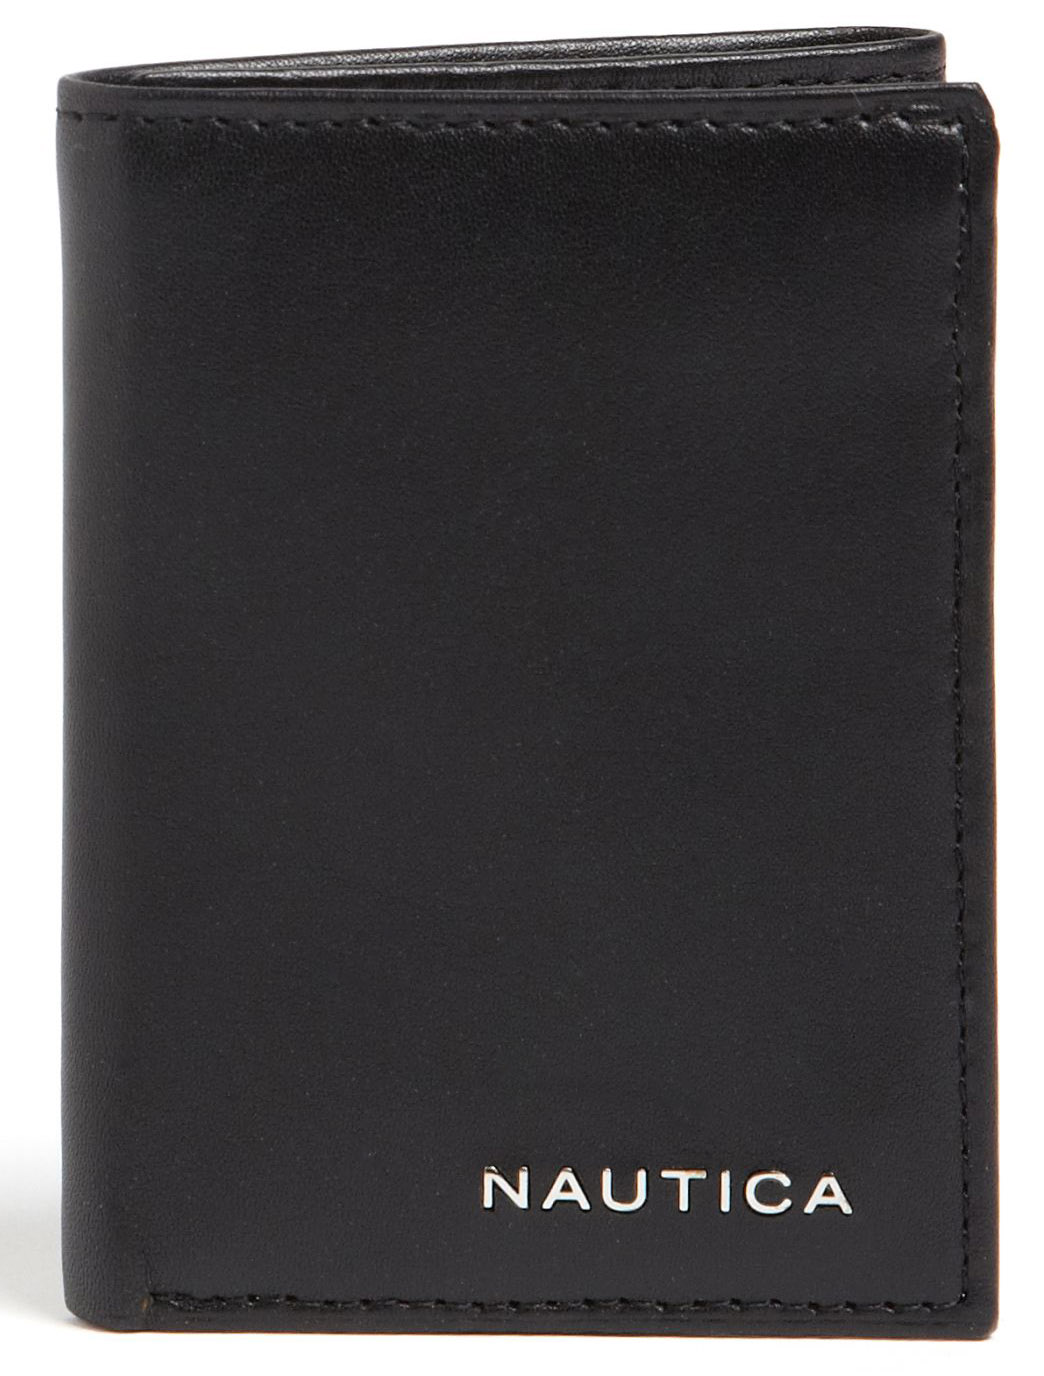 NAUTICA MEN&#39;S LEATHER CREDIT CARD PASSCASE TRIFOLD WALLET - BLACK 6292-02 - NEW | eBay